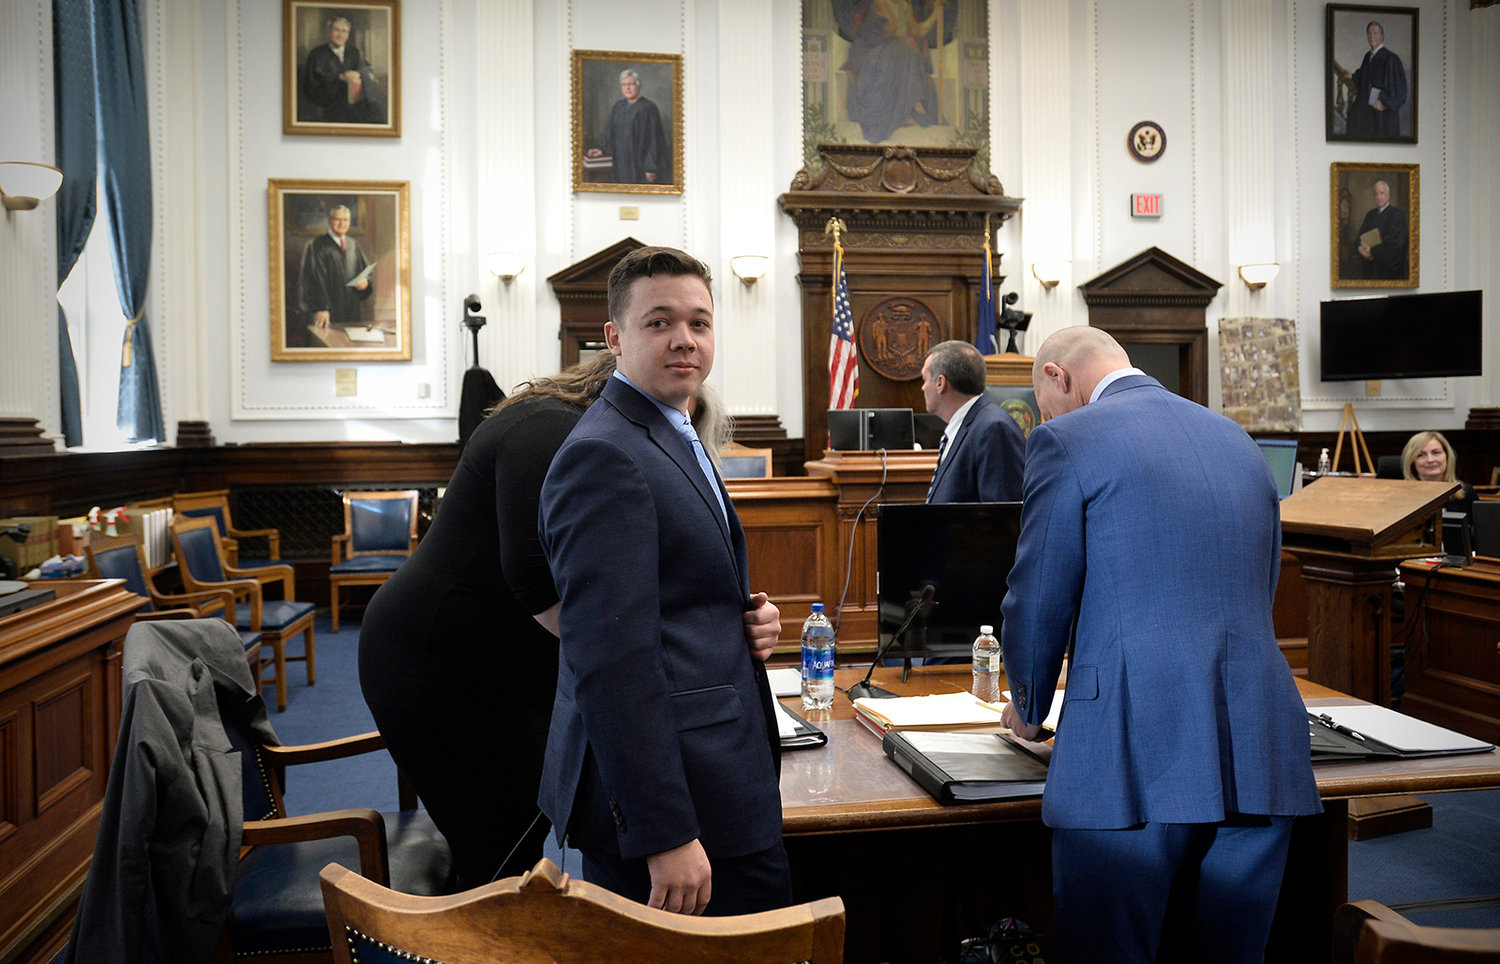 Kyle Rittenhouse, center, makes his way to his seat at the beginning of the day at the Kenosha County Courthouse on Nov. 15, 2021, in Kenosha, Wisconsin. (Sean Krajacic/Pool/Getty Images/TNS)